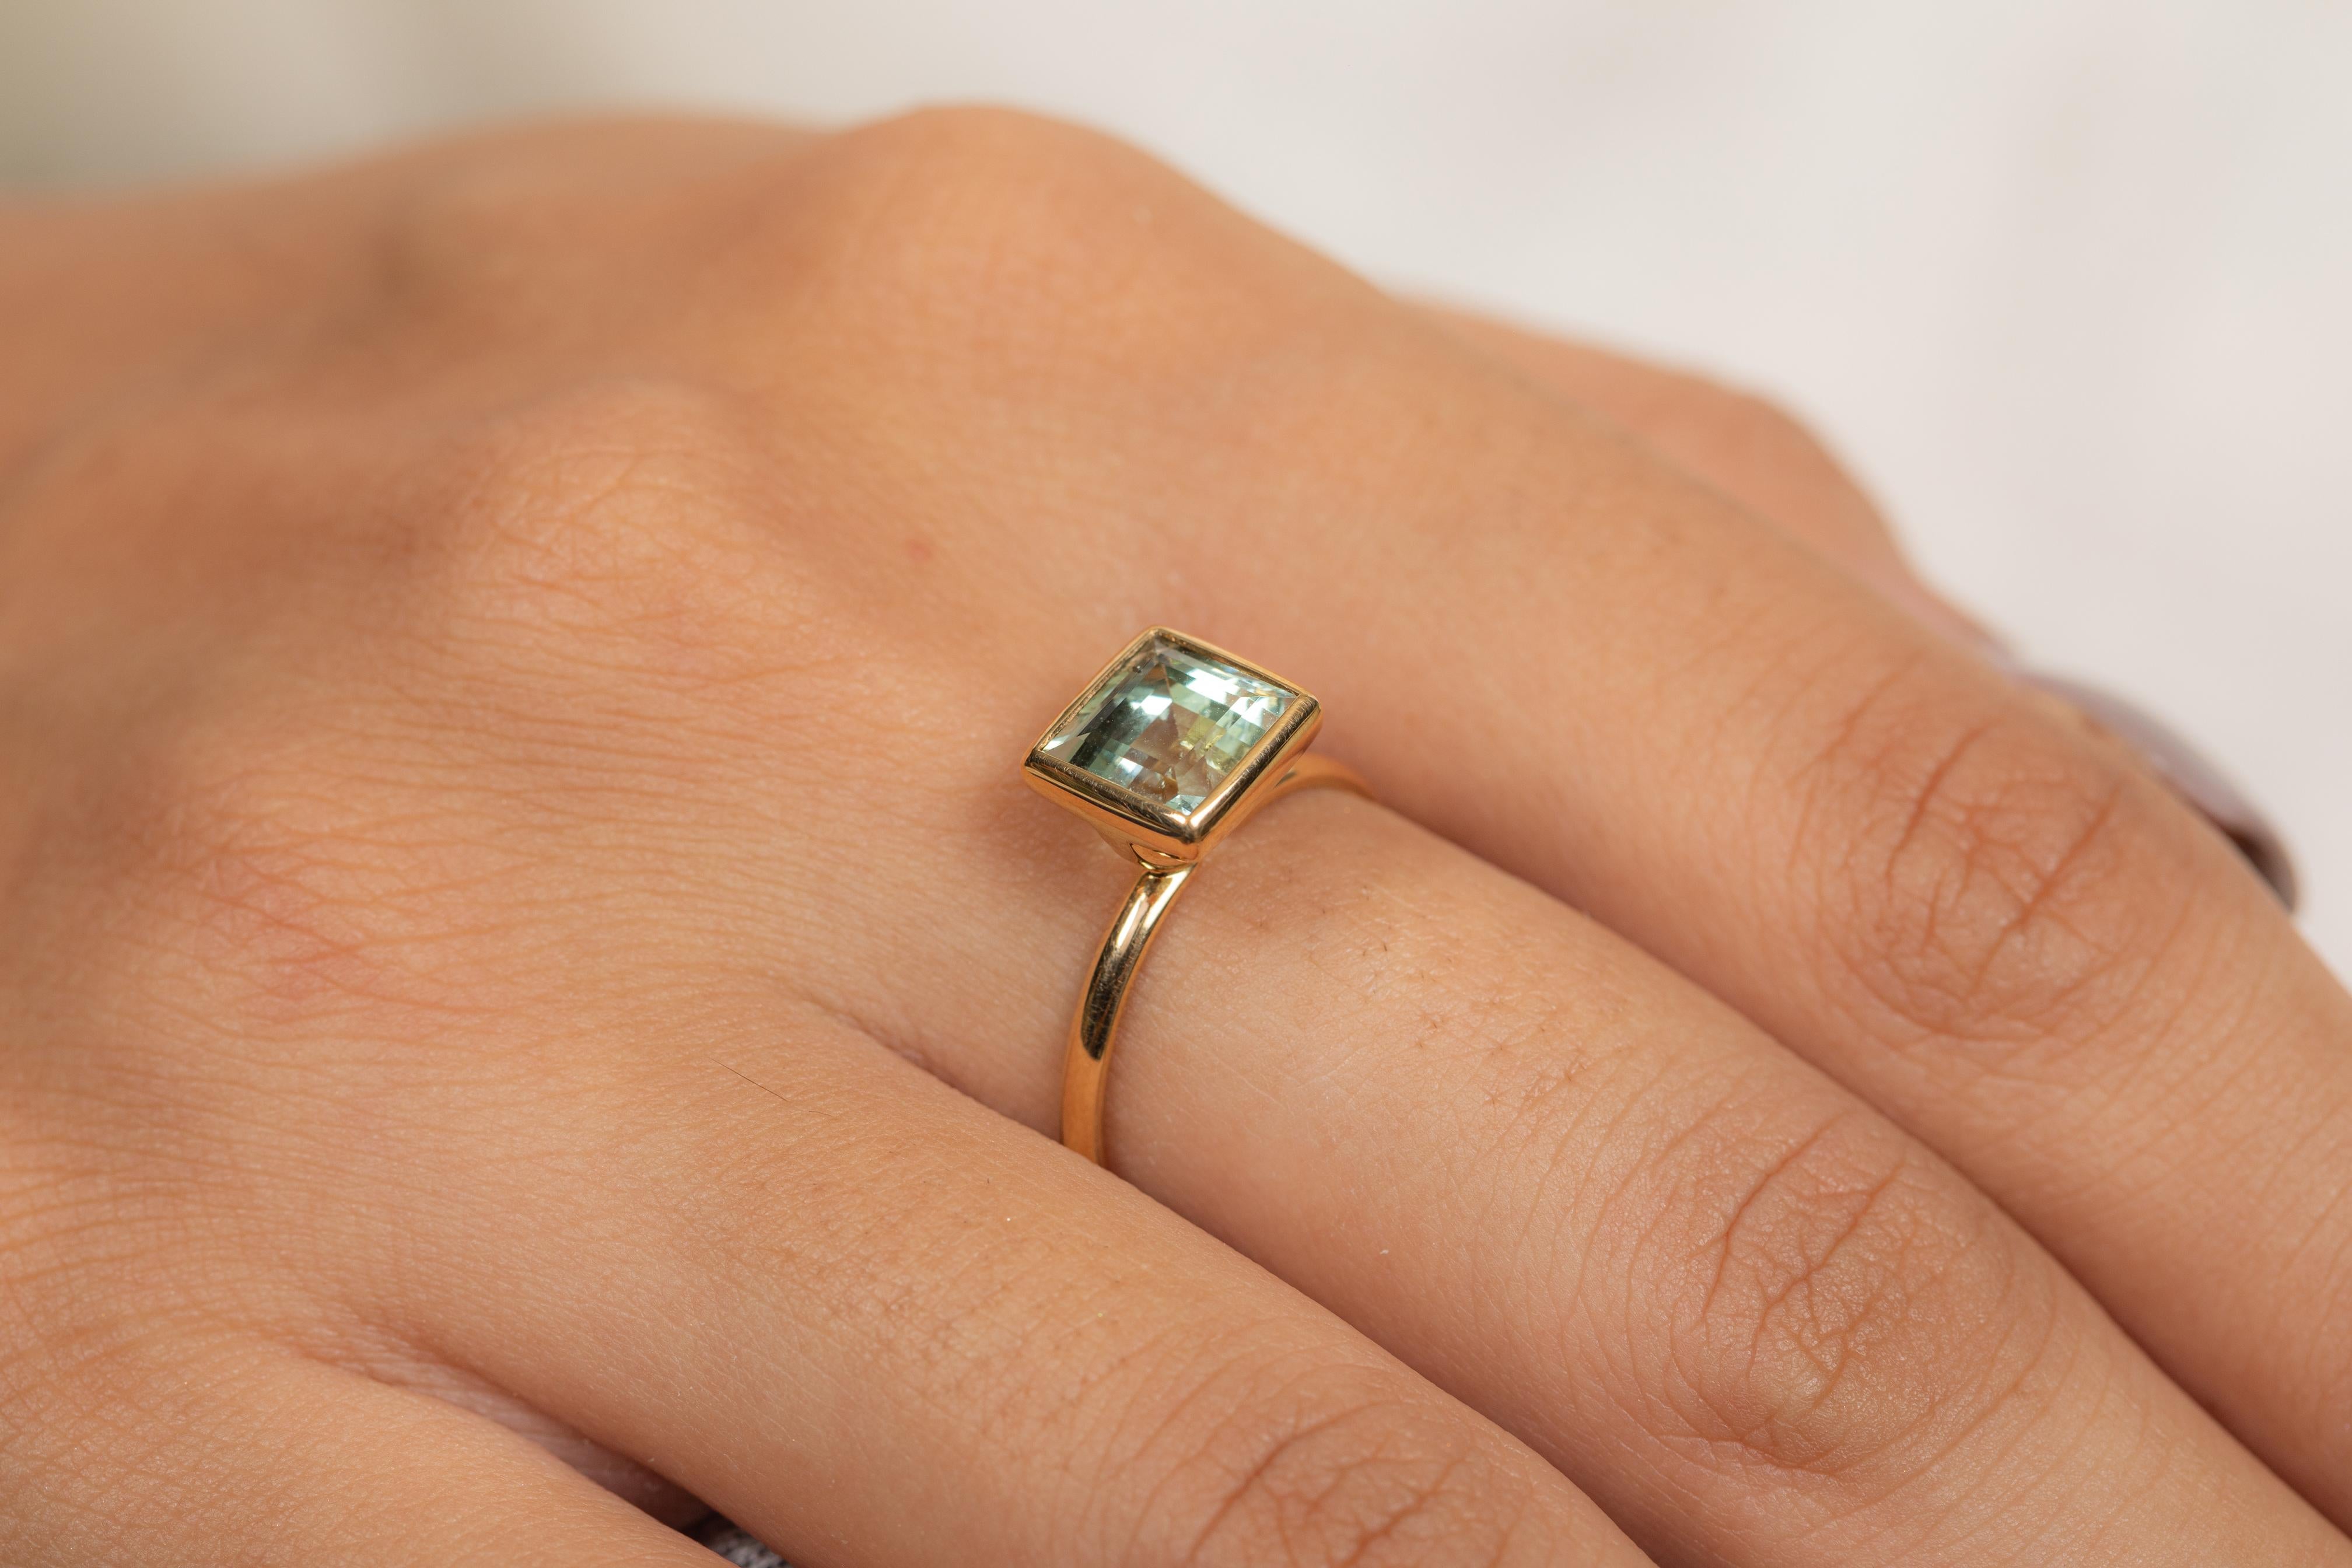 For Sale:  Natural Aquamarine Square Cut Gemstone Ring in 18K Yellow Gold 2